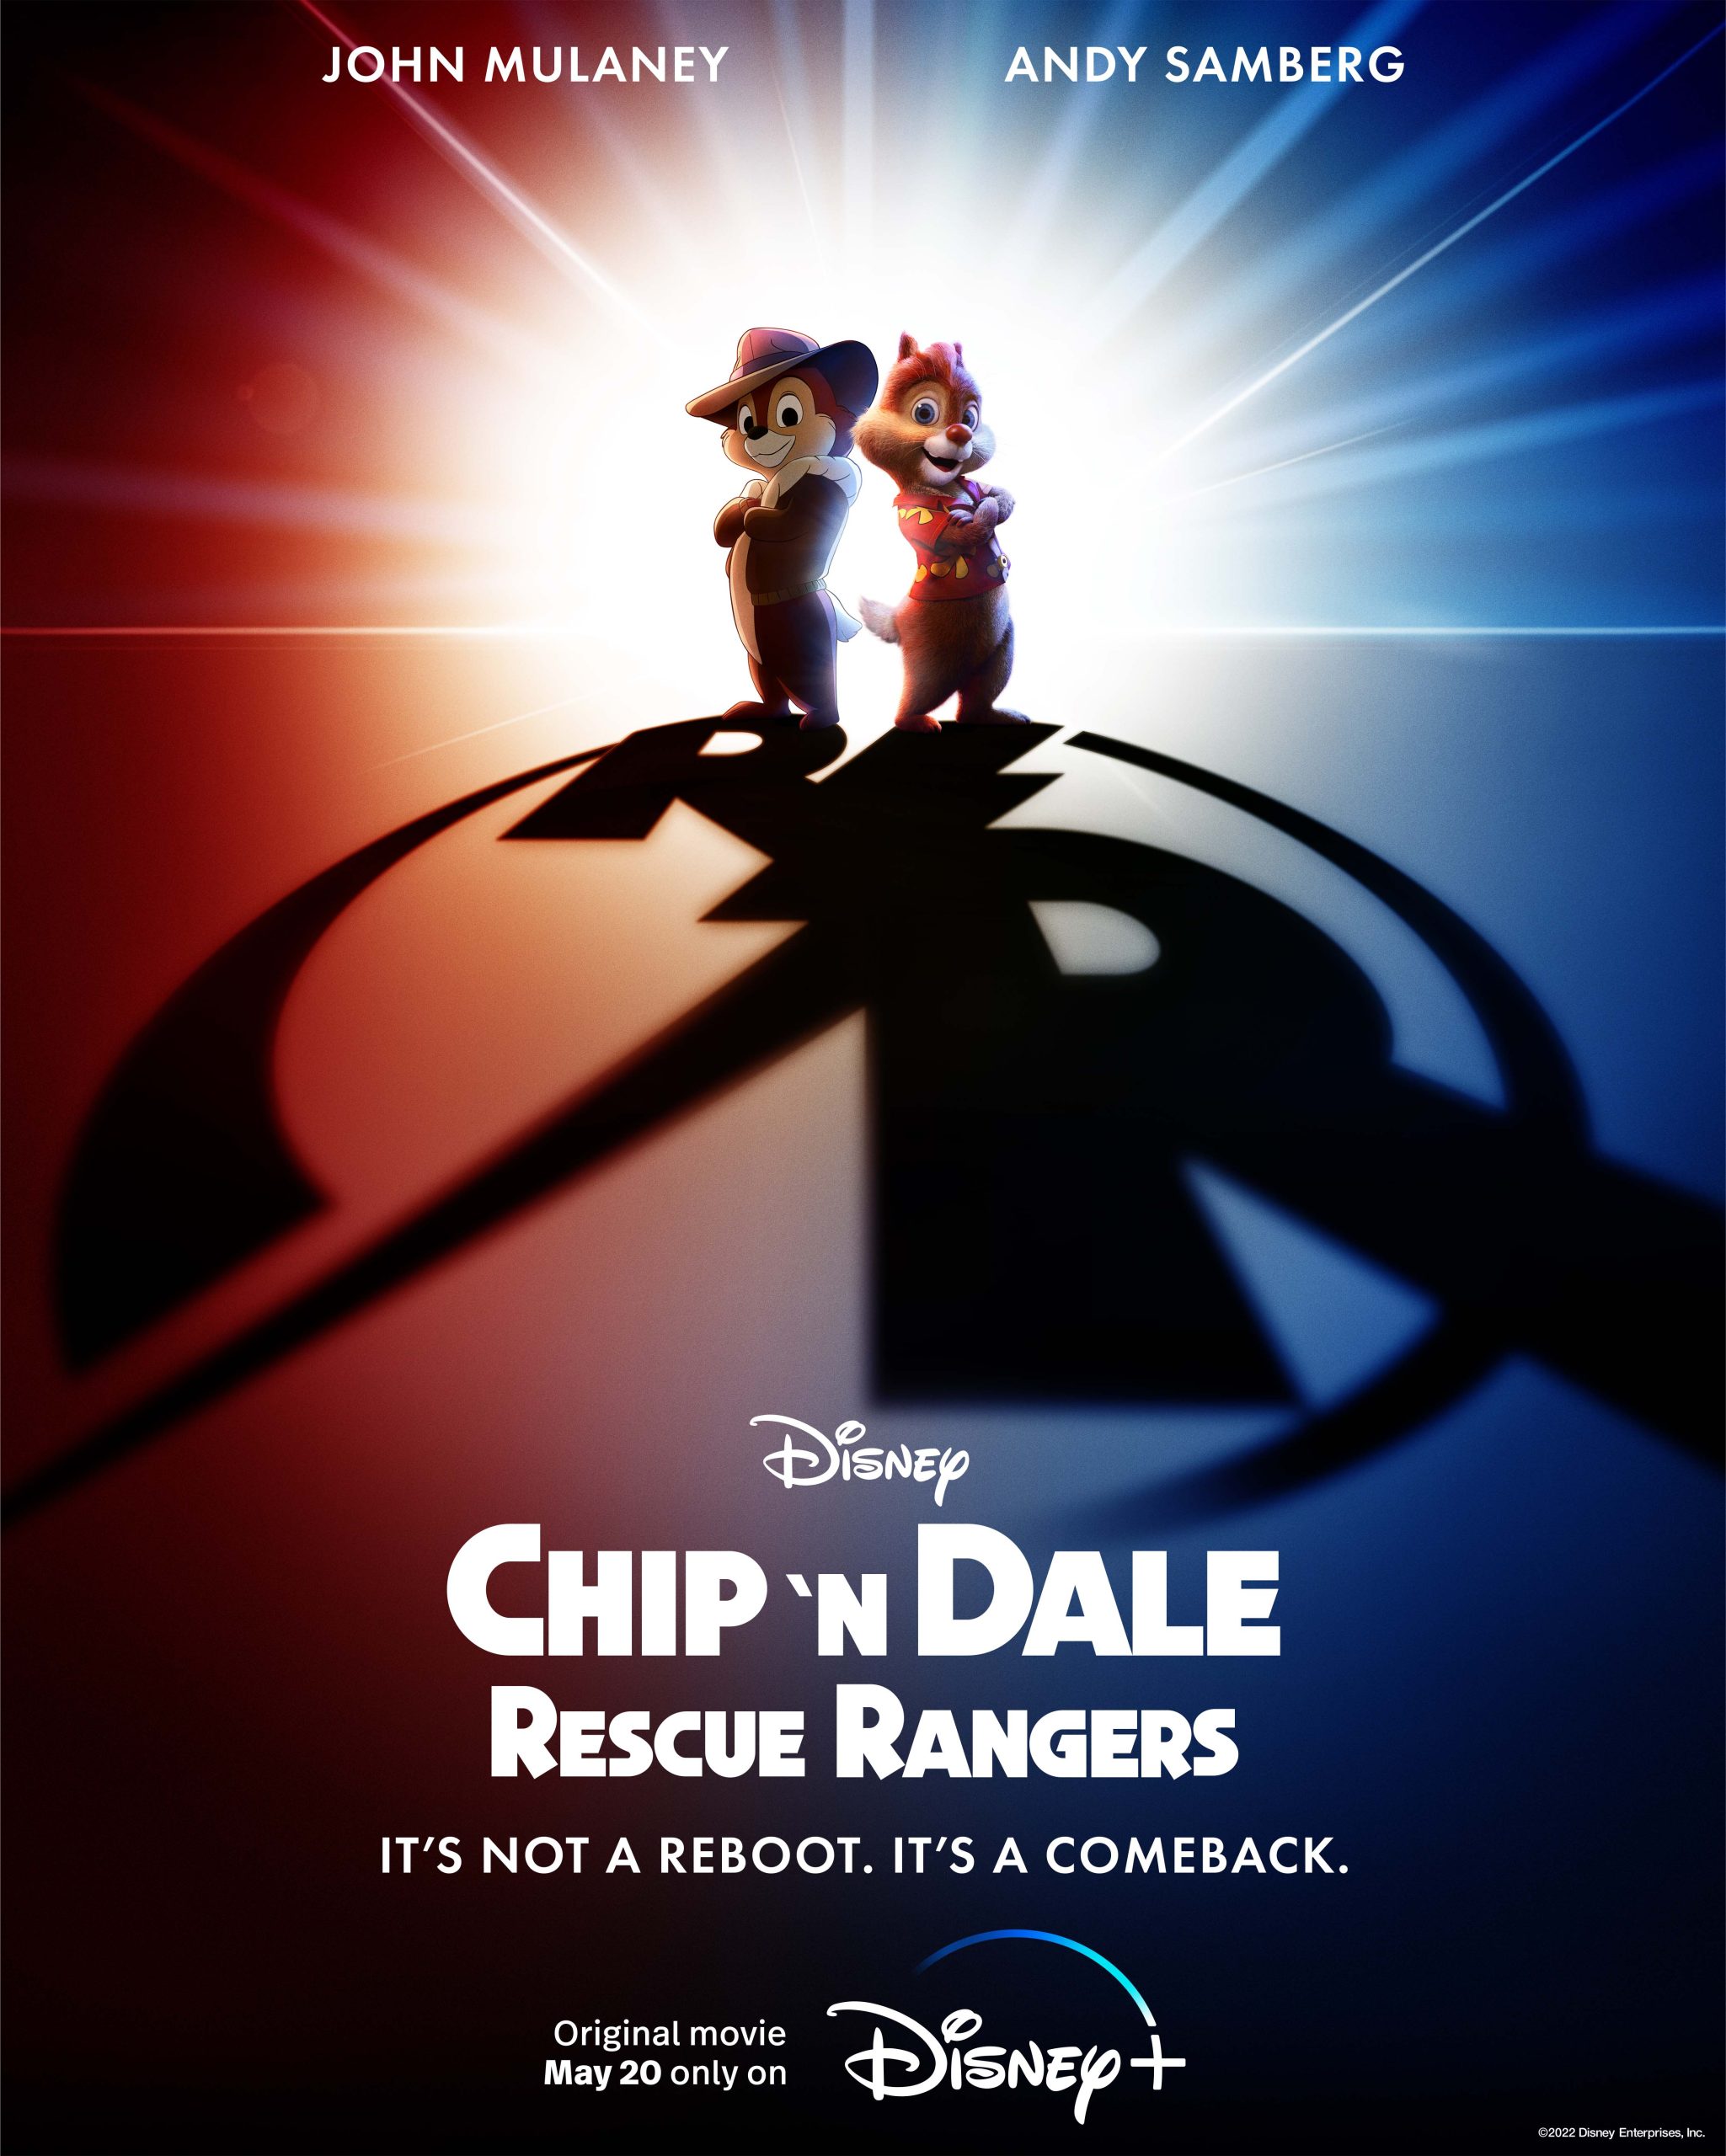 New Movie: “CHIP ‘N DALE: RESCUE RANGERS”